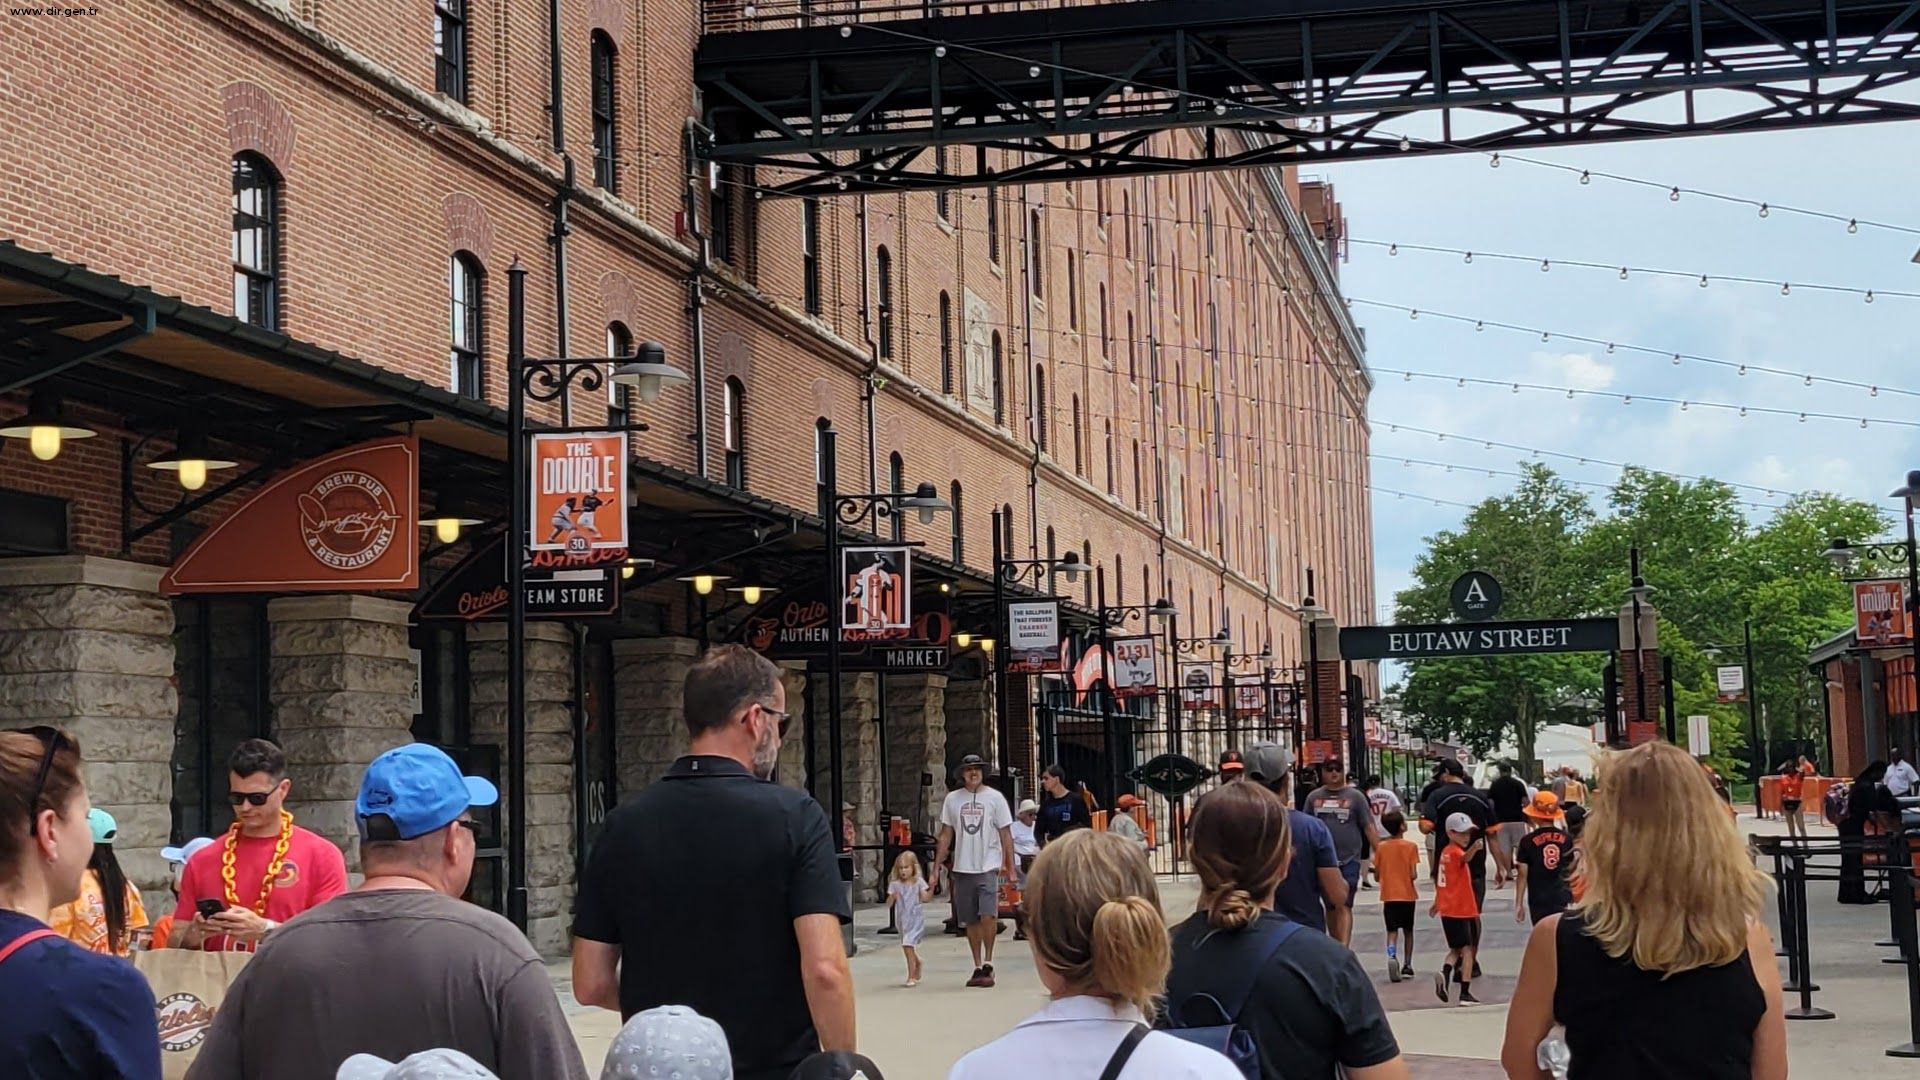 Photos at Majestic Orioles Team Store at Camden Yards - The